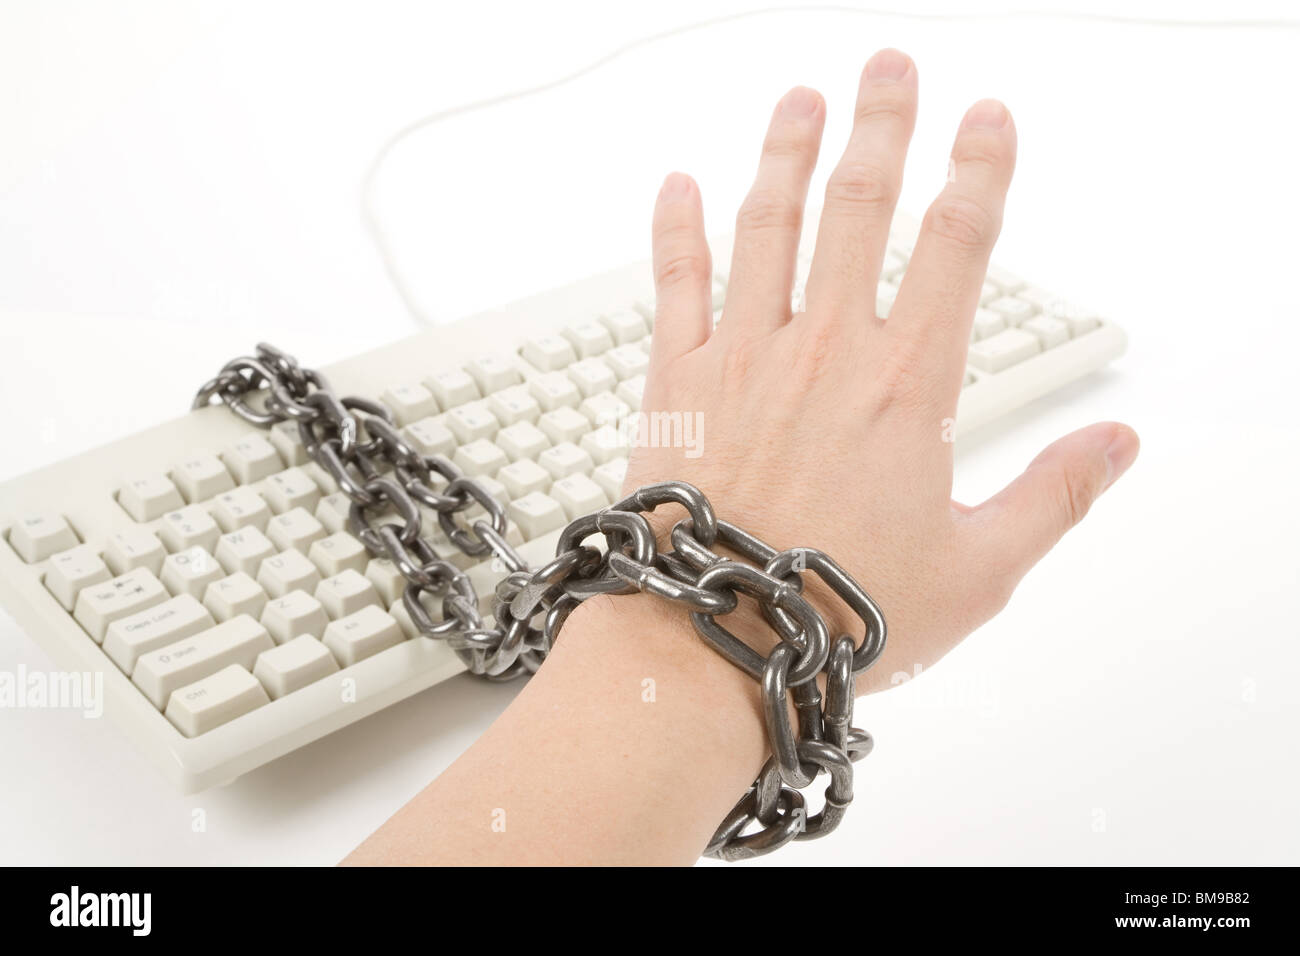 Hand had been Tied Up by chain with Computer Keyboard Stock Photo